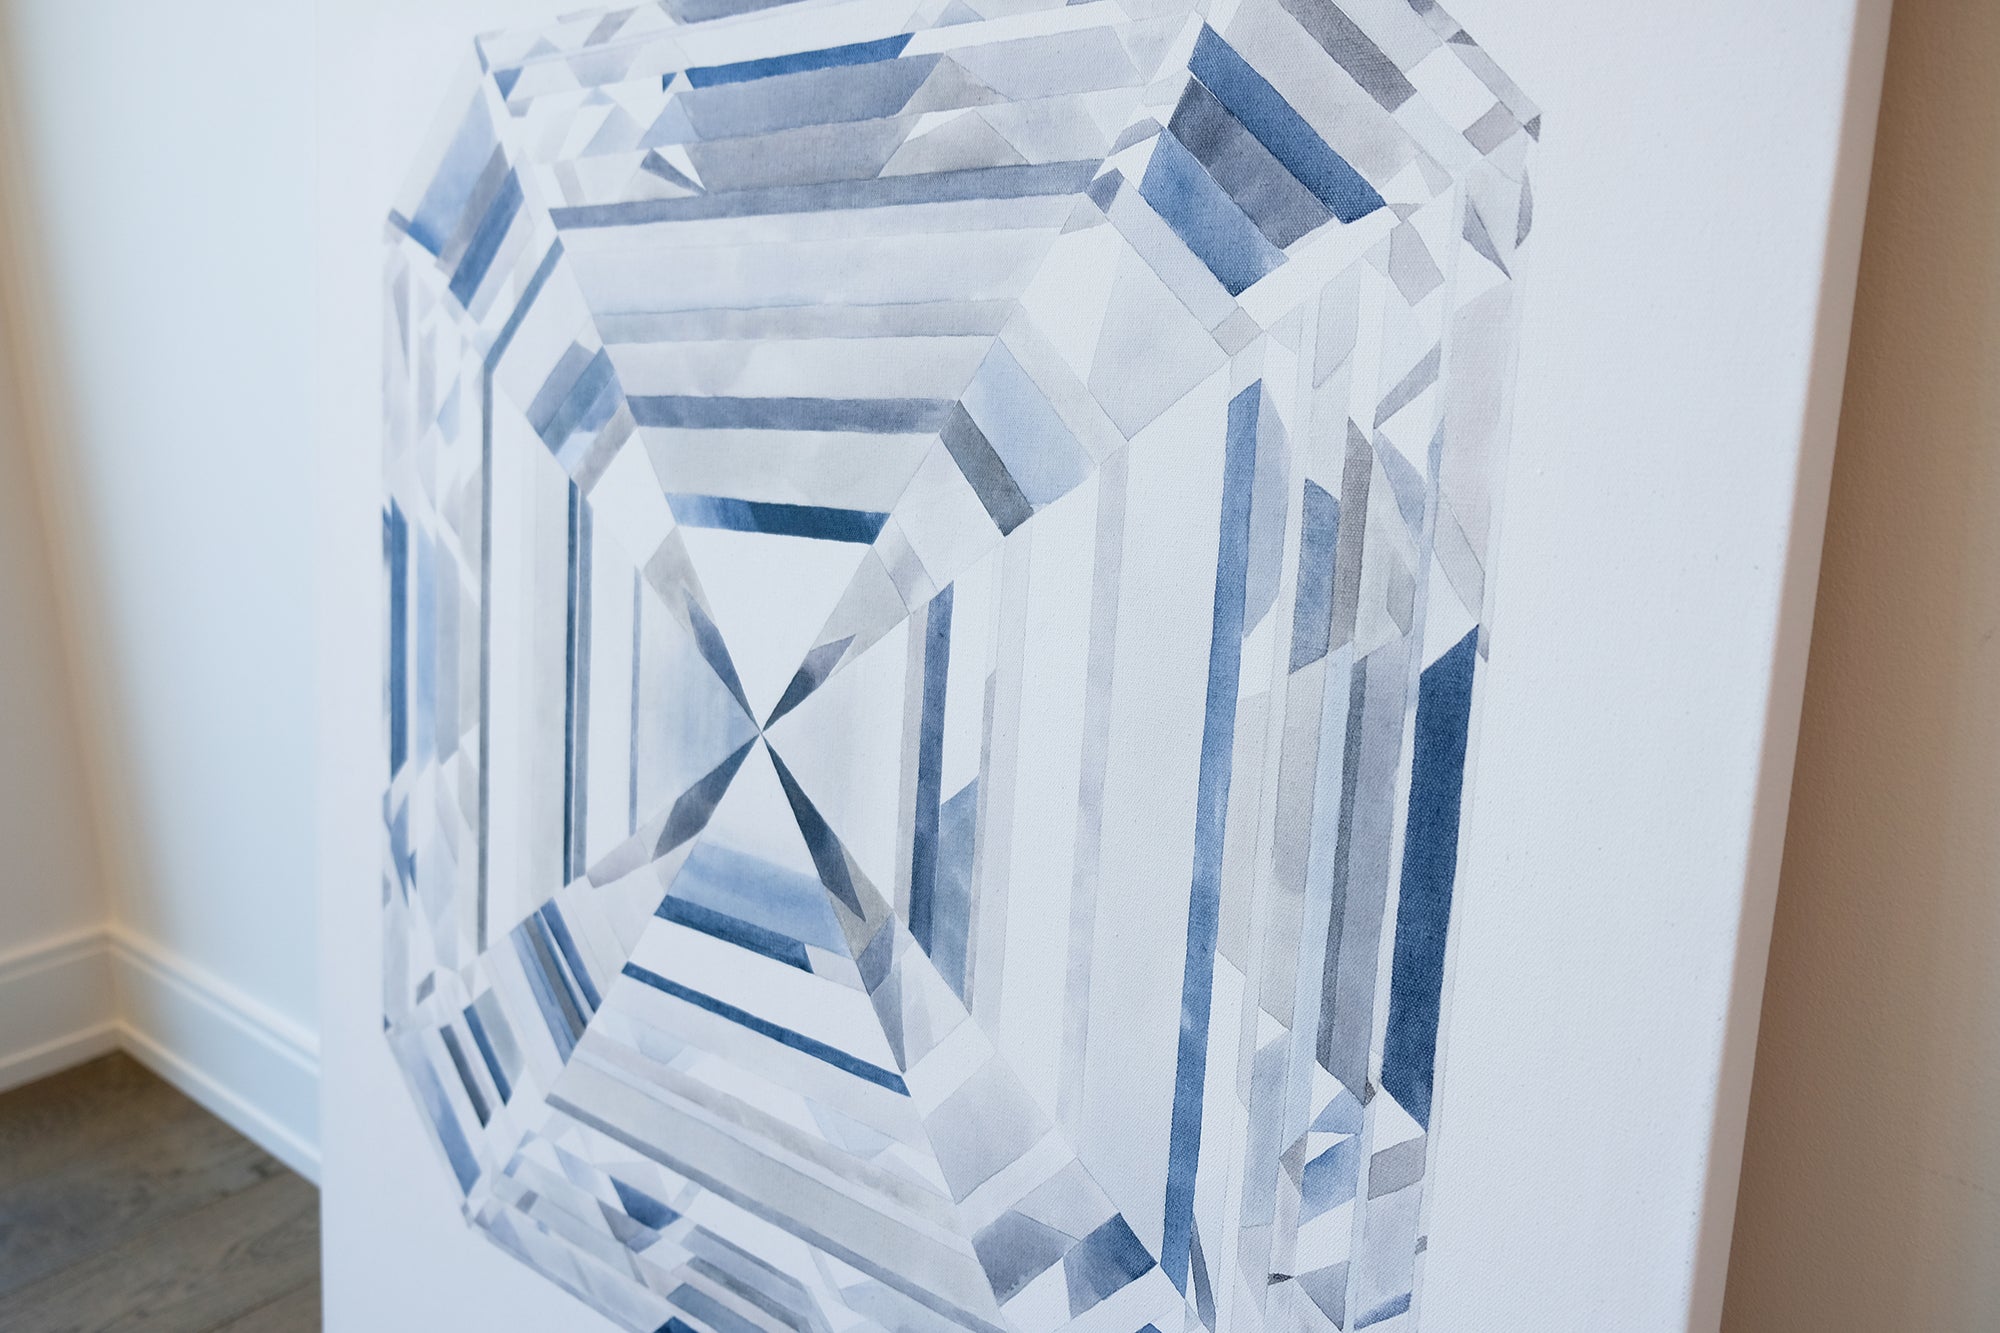 Diamond Asscher Cut Abstract Acrylic Painting - Original Painting 36 x 48 inches